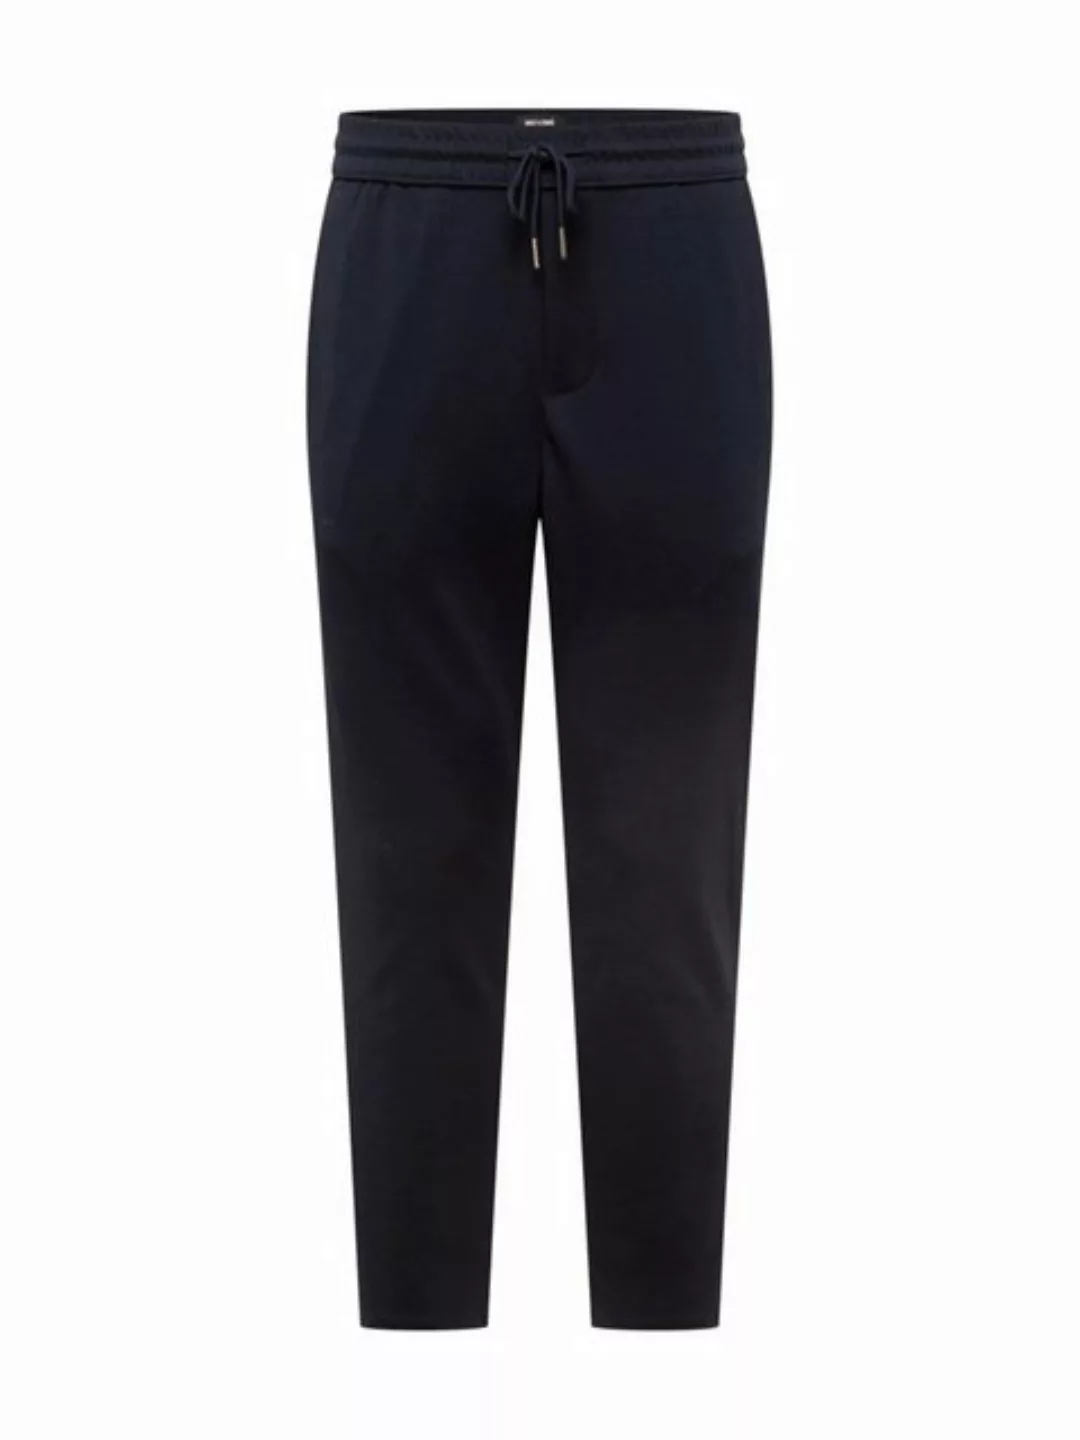 ONLY & SONS Chinohose "LINUS PANT" günstig online kaufen